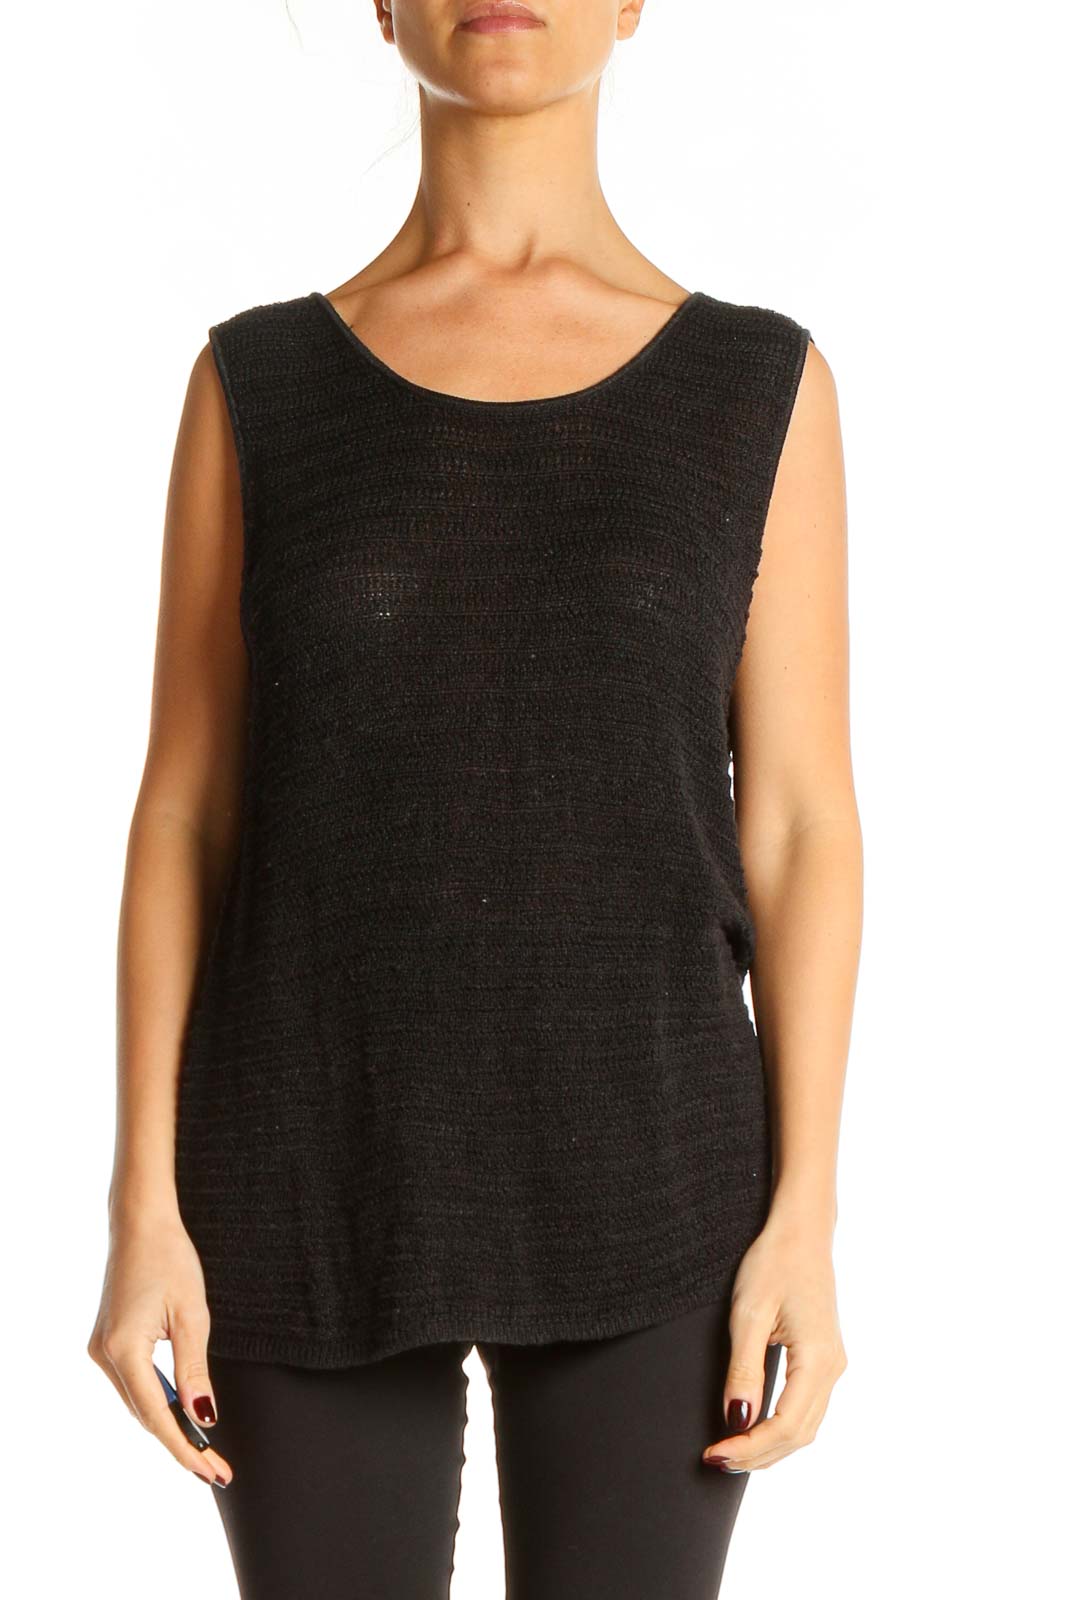 Black Casual Tank Top Front